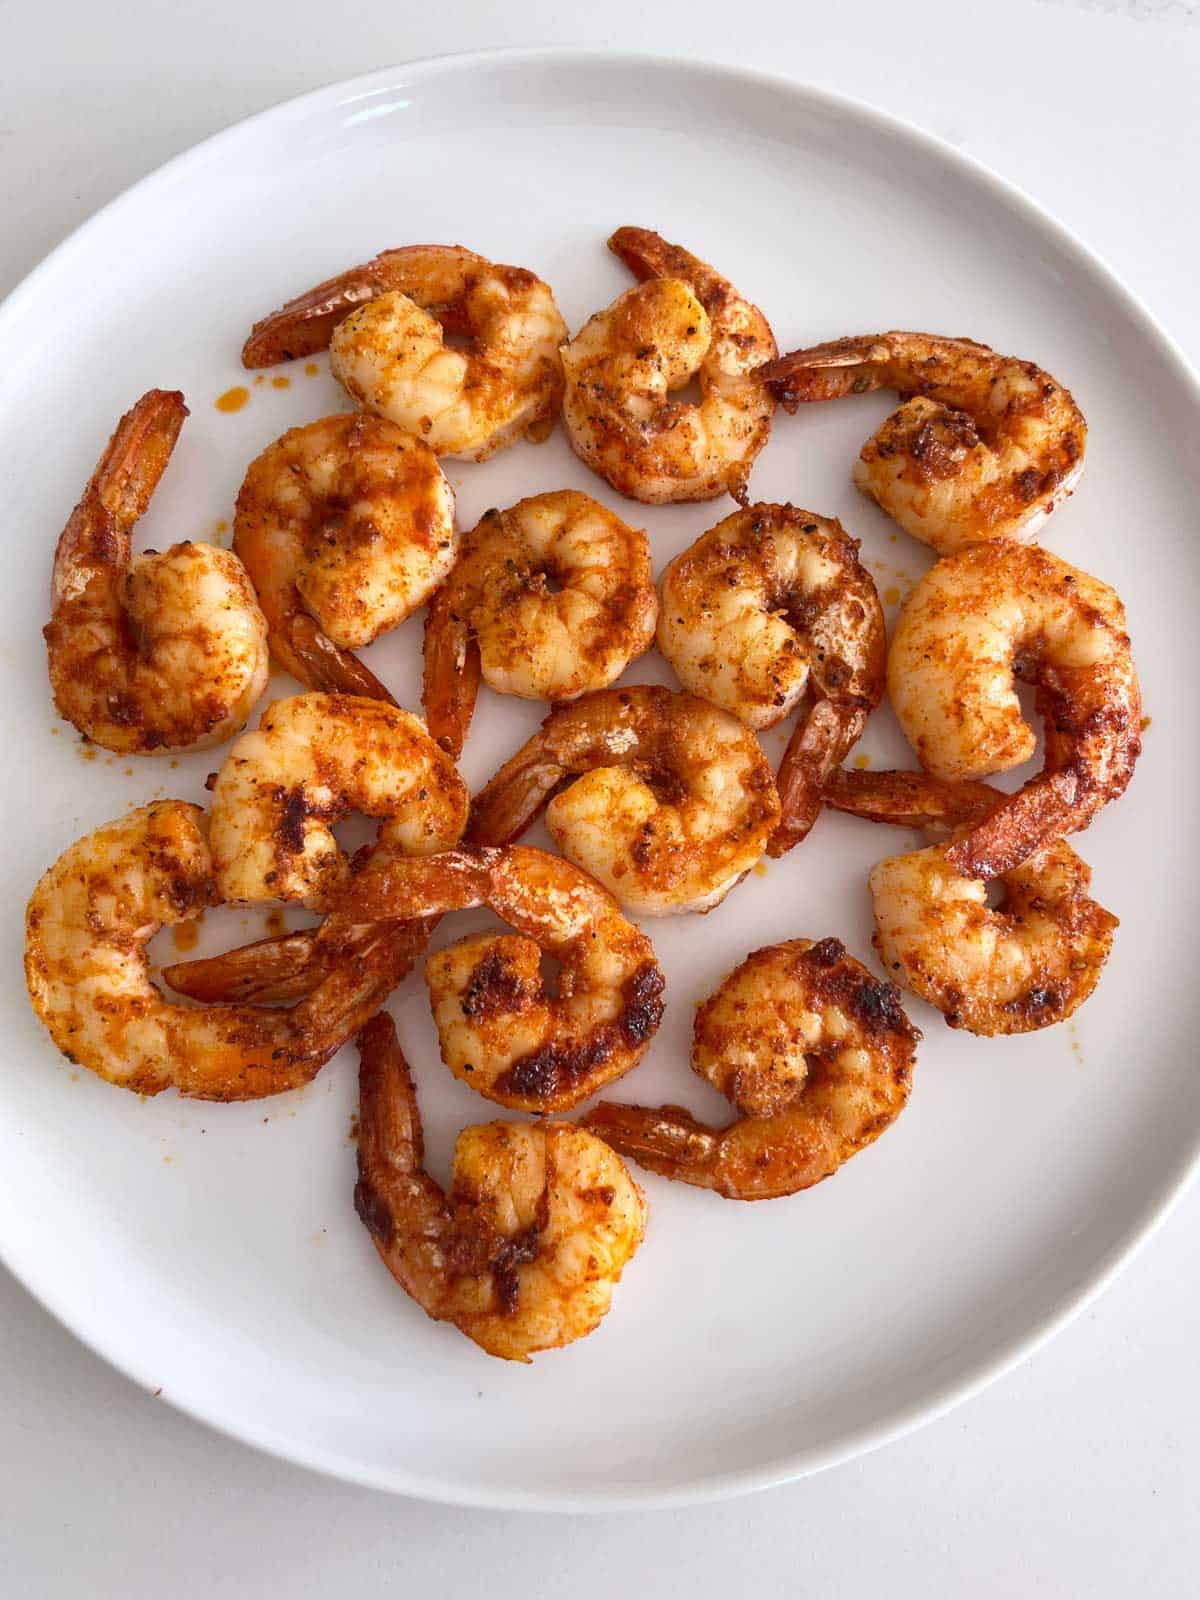 Heavily spiced grilled shrimp on a white plate.